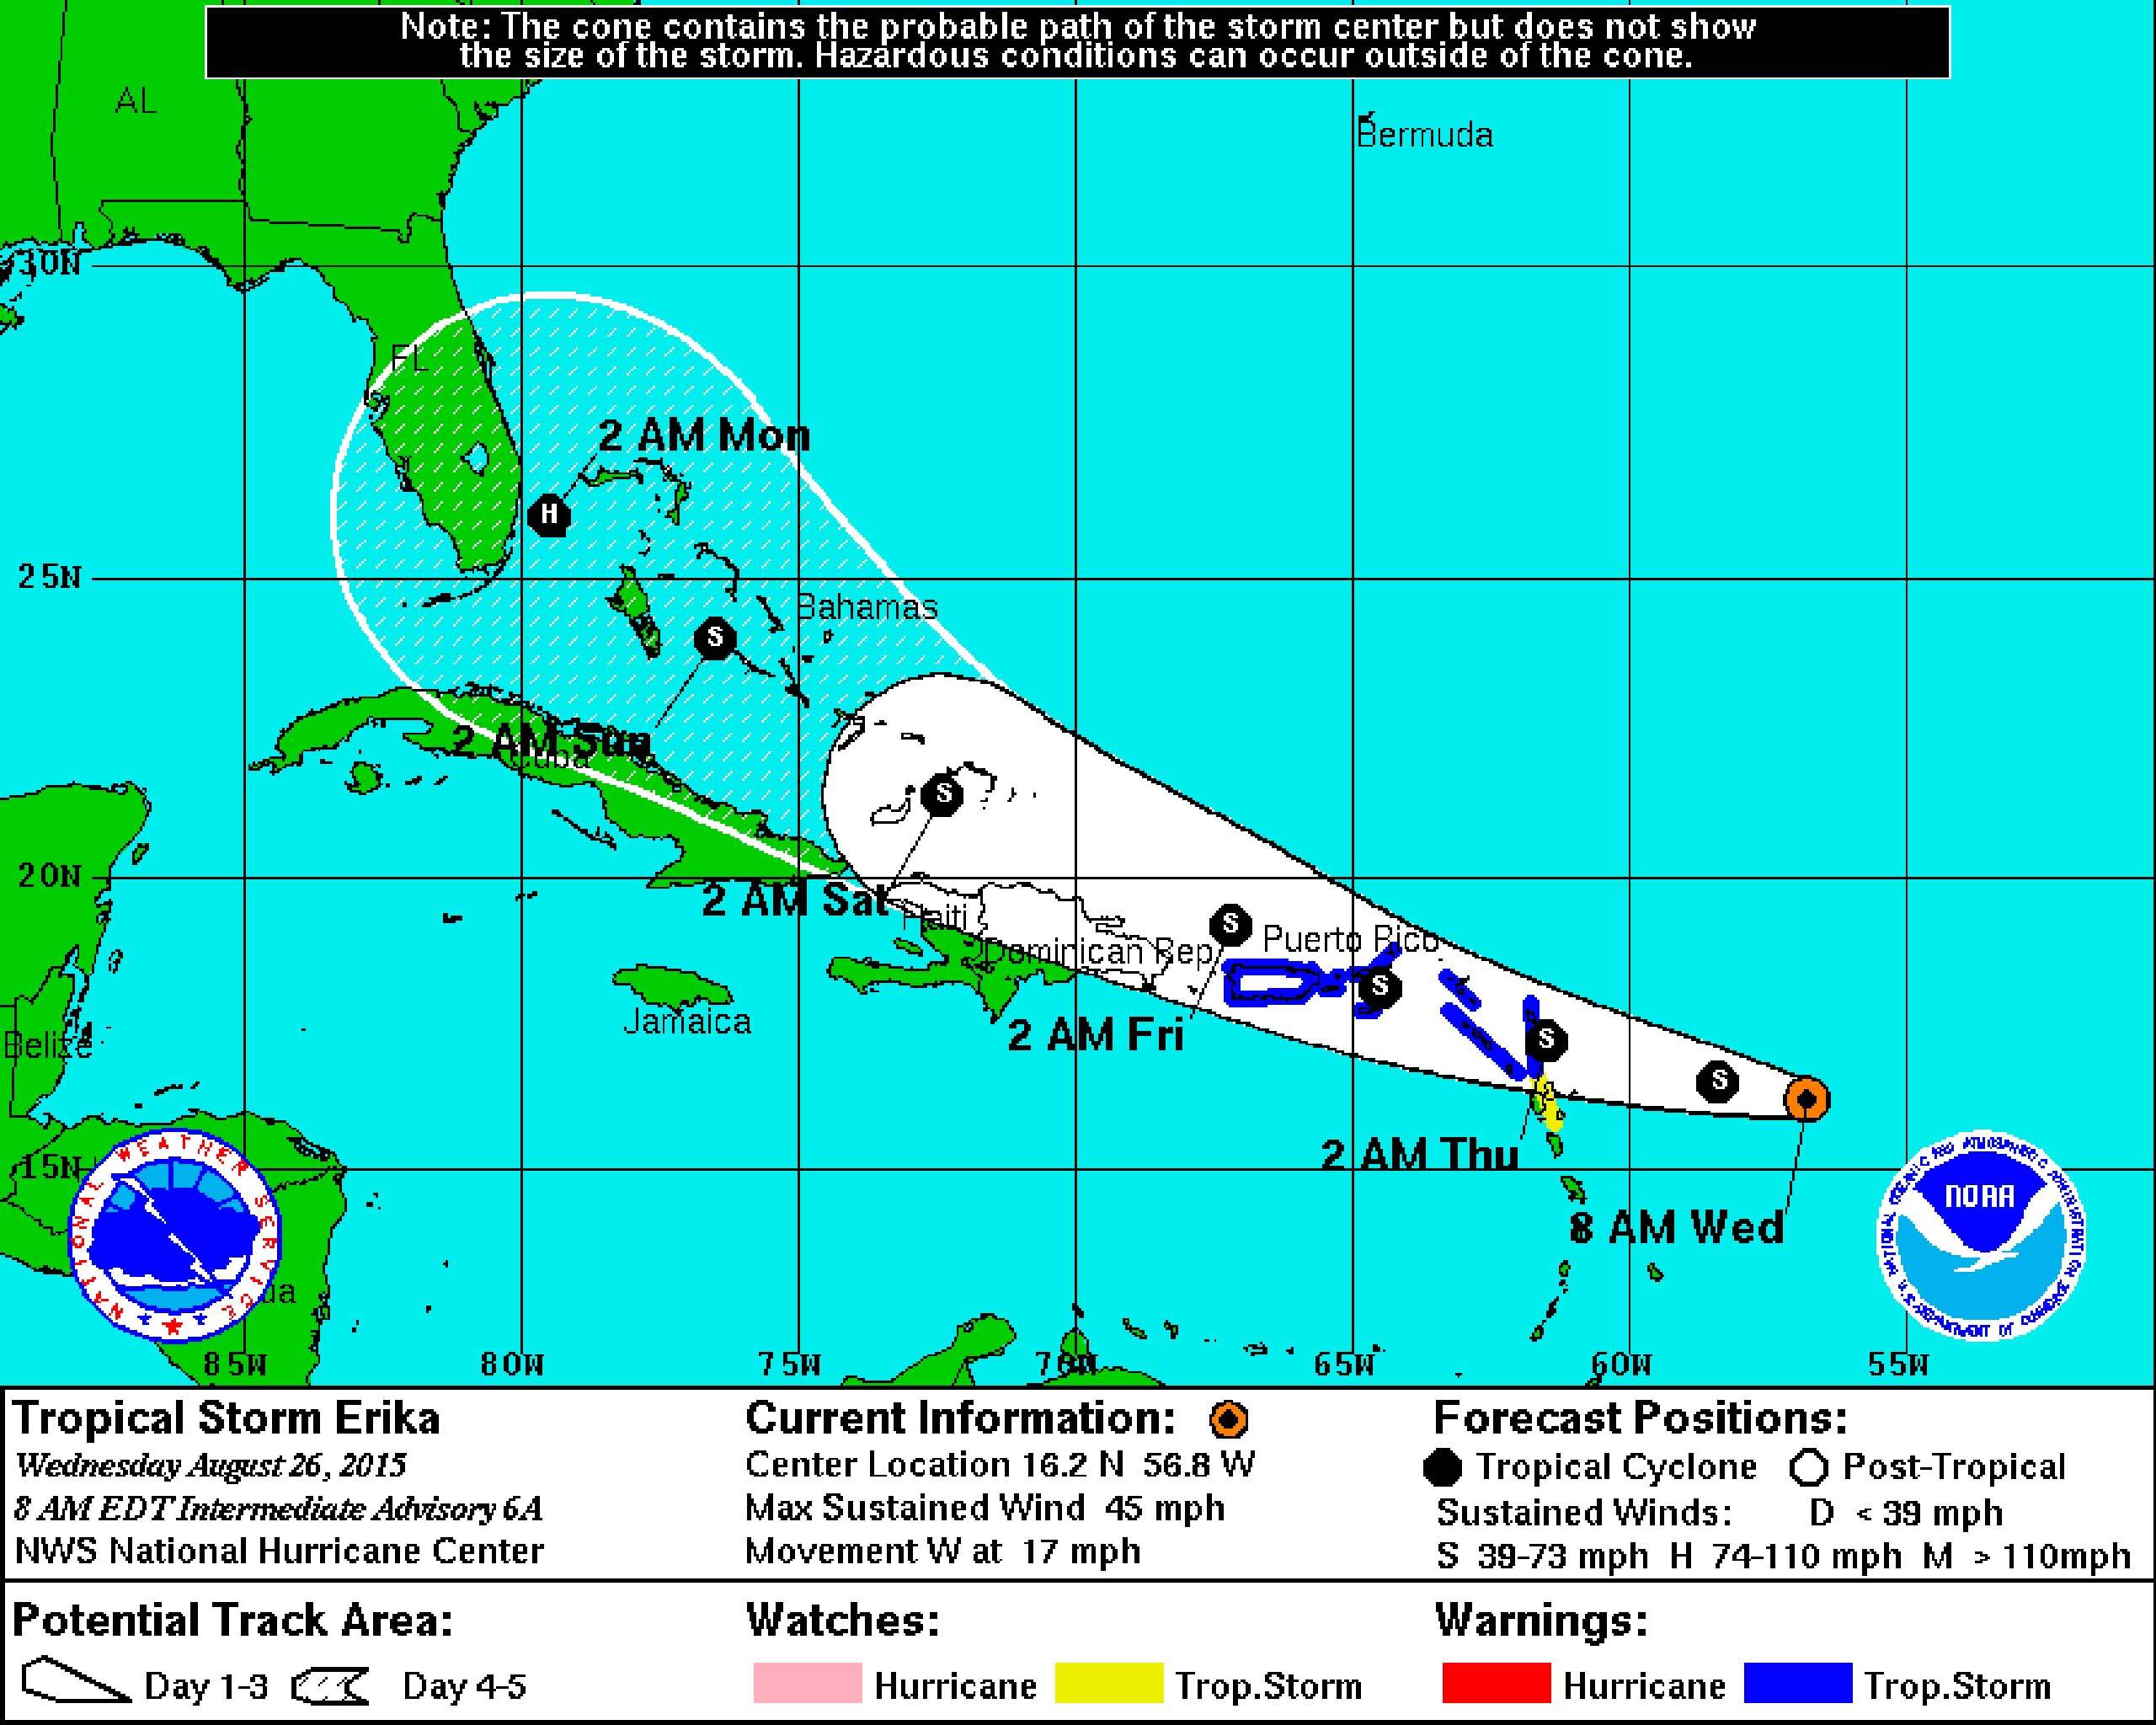 Tropical Storm ERIKA to bring possible severe weather to Central Florida early next week